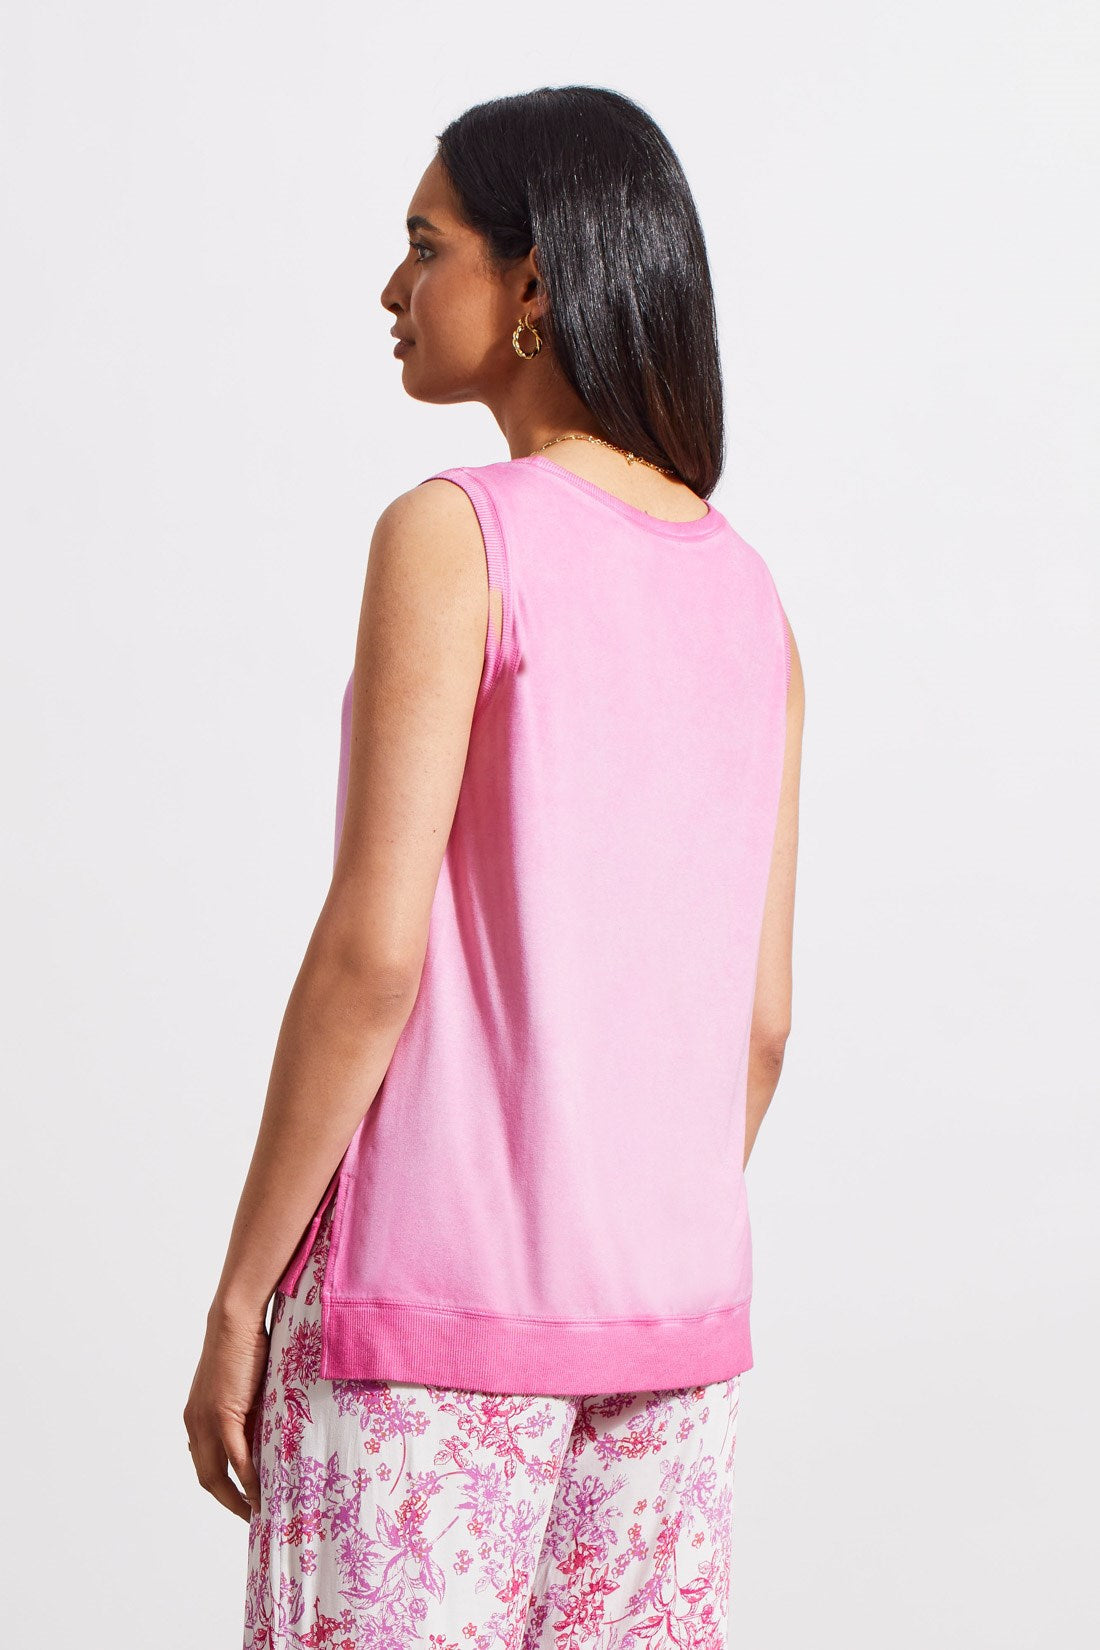 A solid color makes this tank top a wardrobe all-star when it comes to styling options, while the special wash effect gives it a subtle dash of unique flair. We love the sleeveless design, ribbed finishing, and side-slit hem that hangs lower in the back.